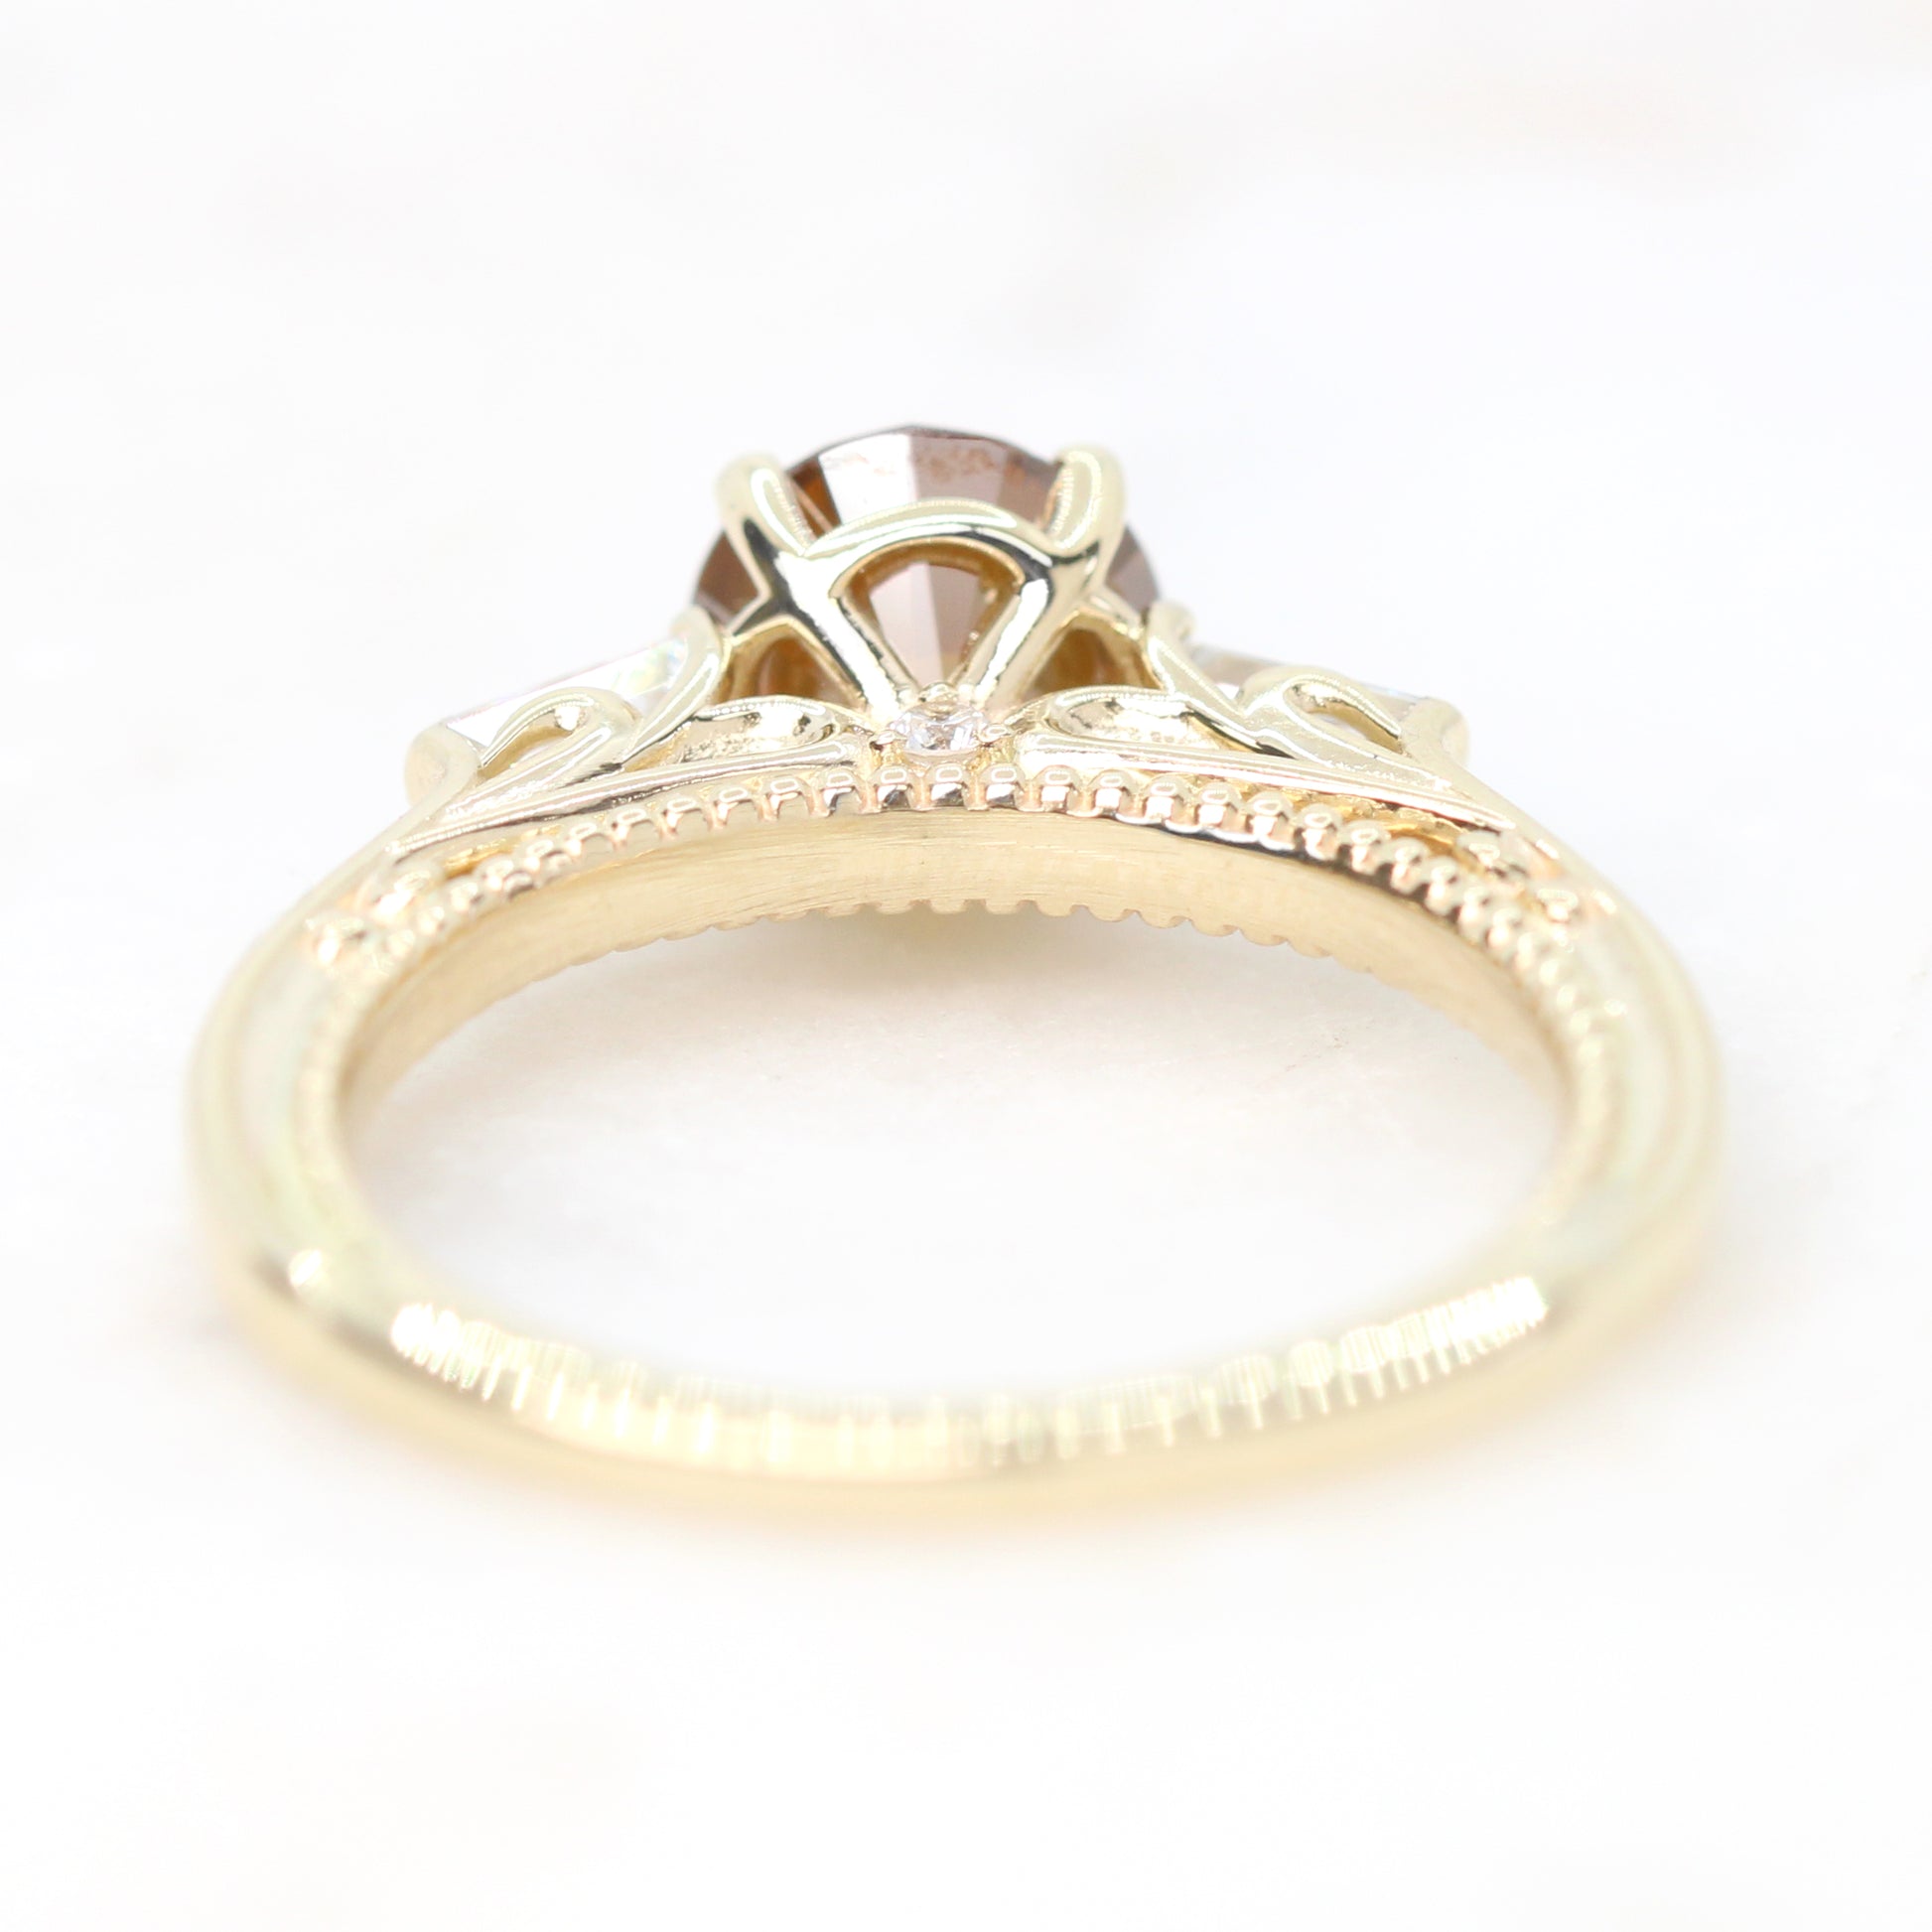 Bella Ring with a 1.29 Carat Round Orange Salt and Pepper Diamond and White Accent Diamonds in 14k Yellow Gold - Ready to Size and Ship - Midwinter Co. Alternative Bridal Rings and Modern Fine Jewelry